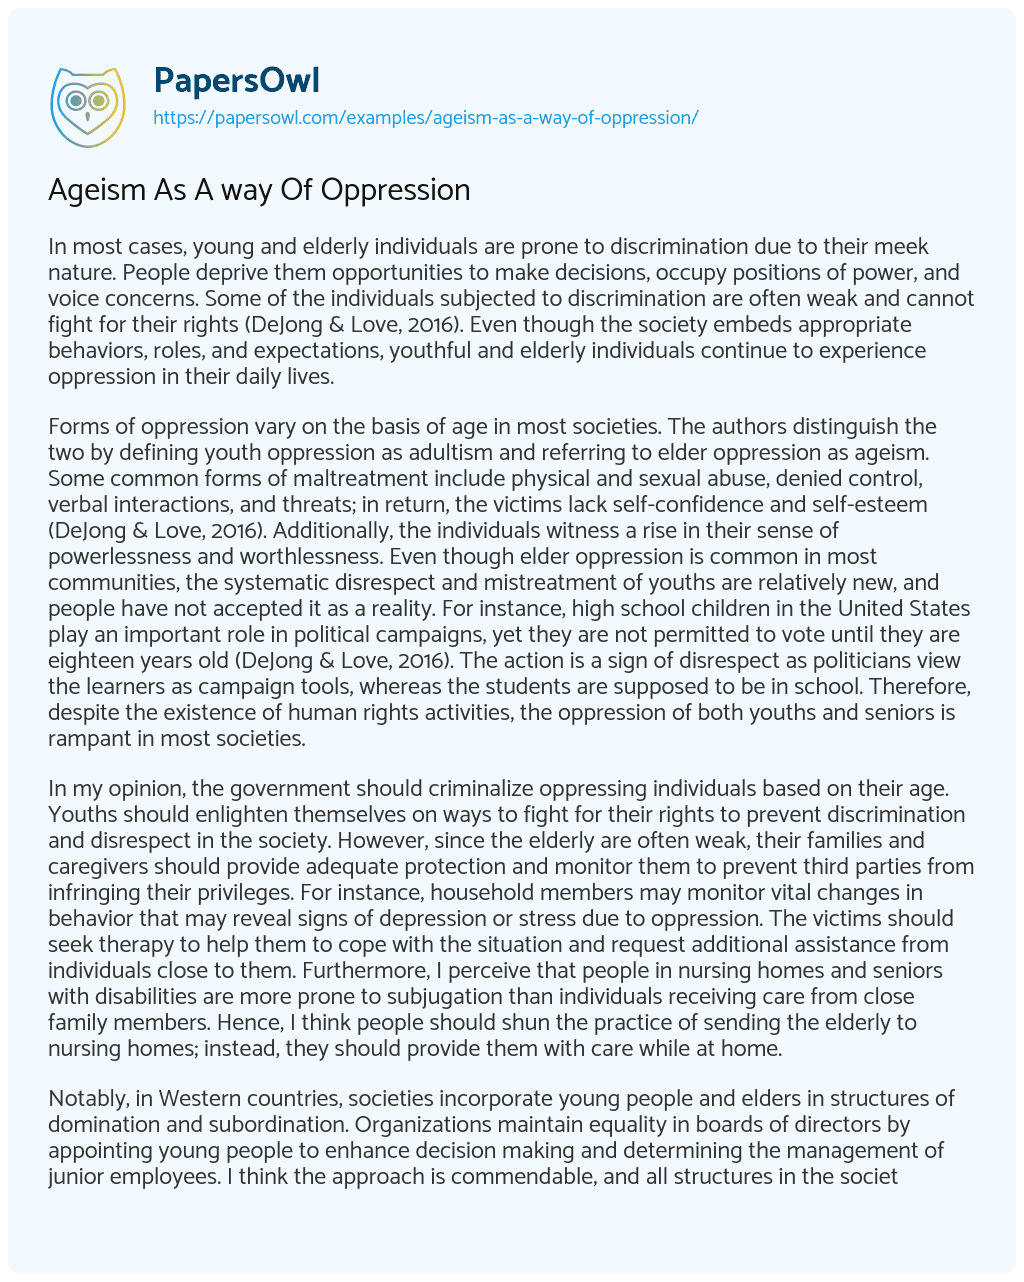 Essay on Ageism as a Way of Oppression